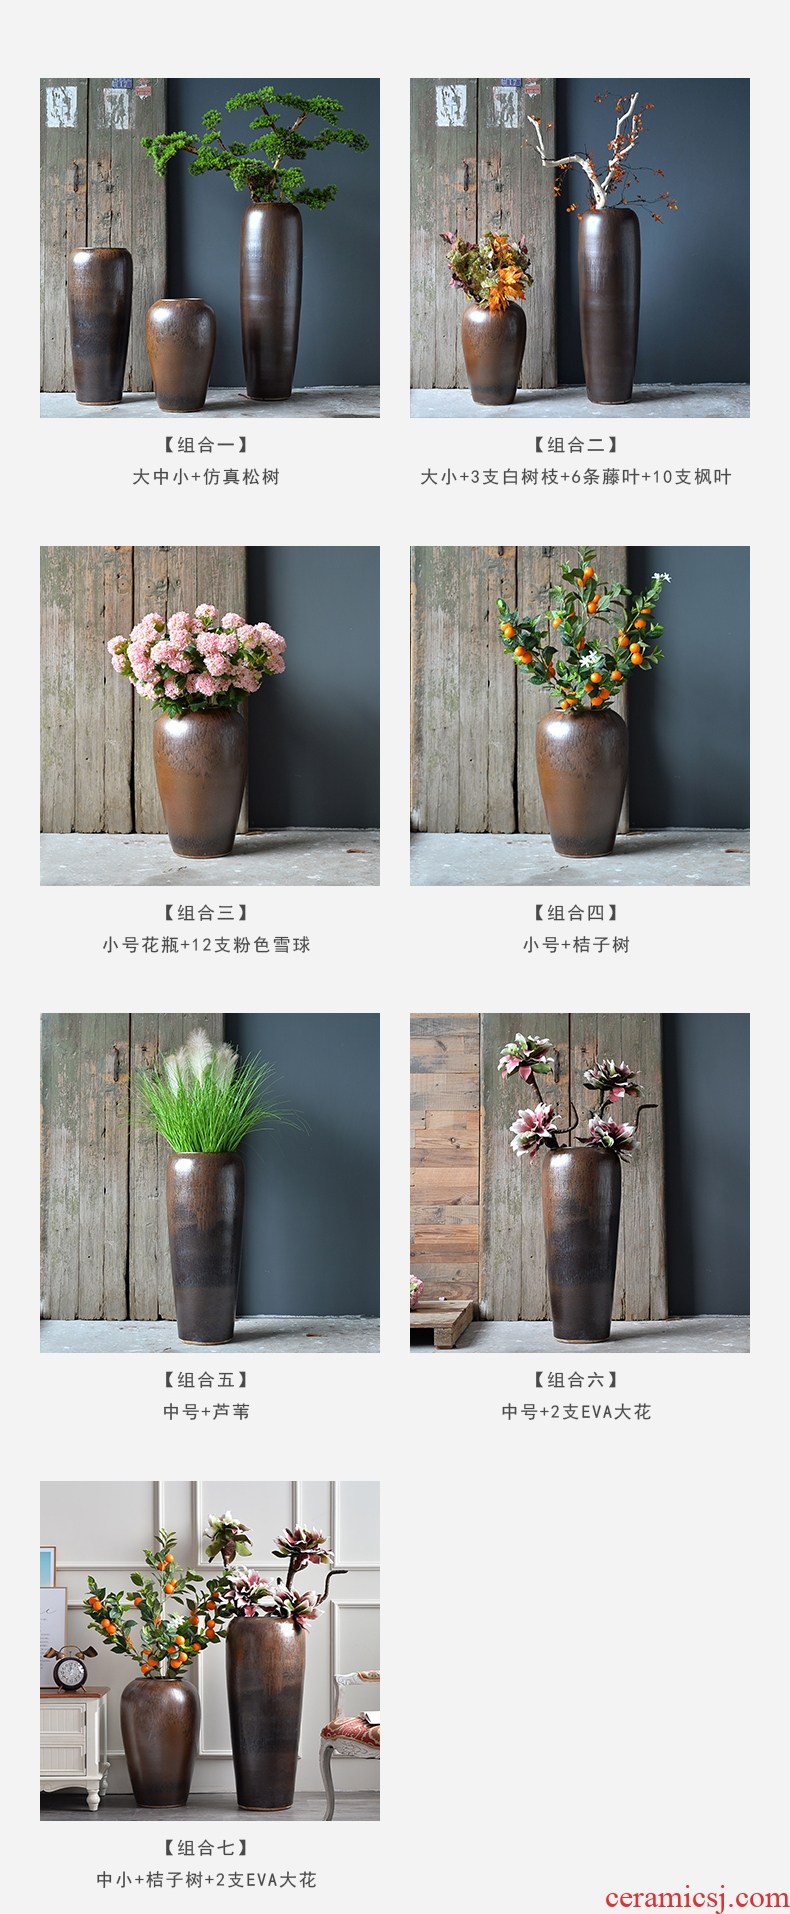 Ceramic floor big dried flower vase planting sitting room place hotel villa covers coarse pottery restoring ancient ways do old creative decoration - 599144691659